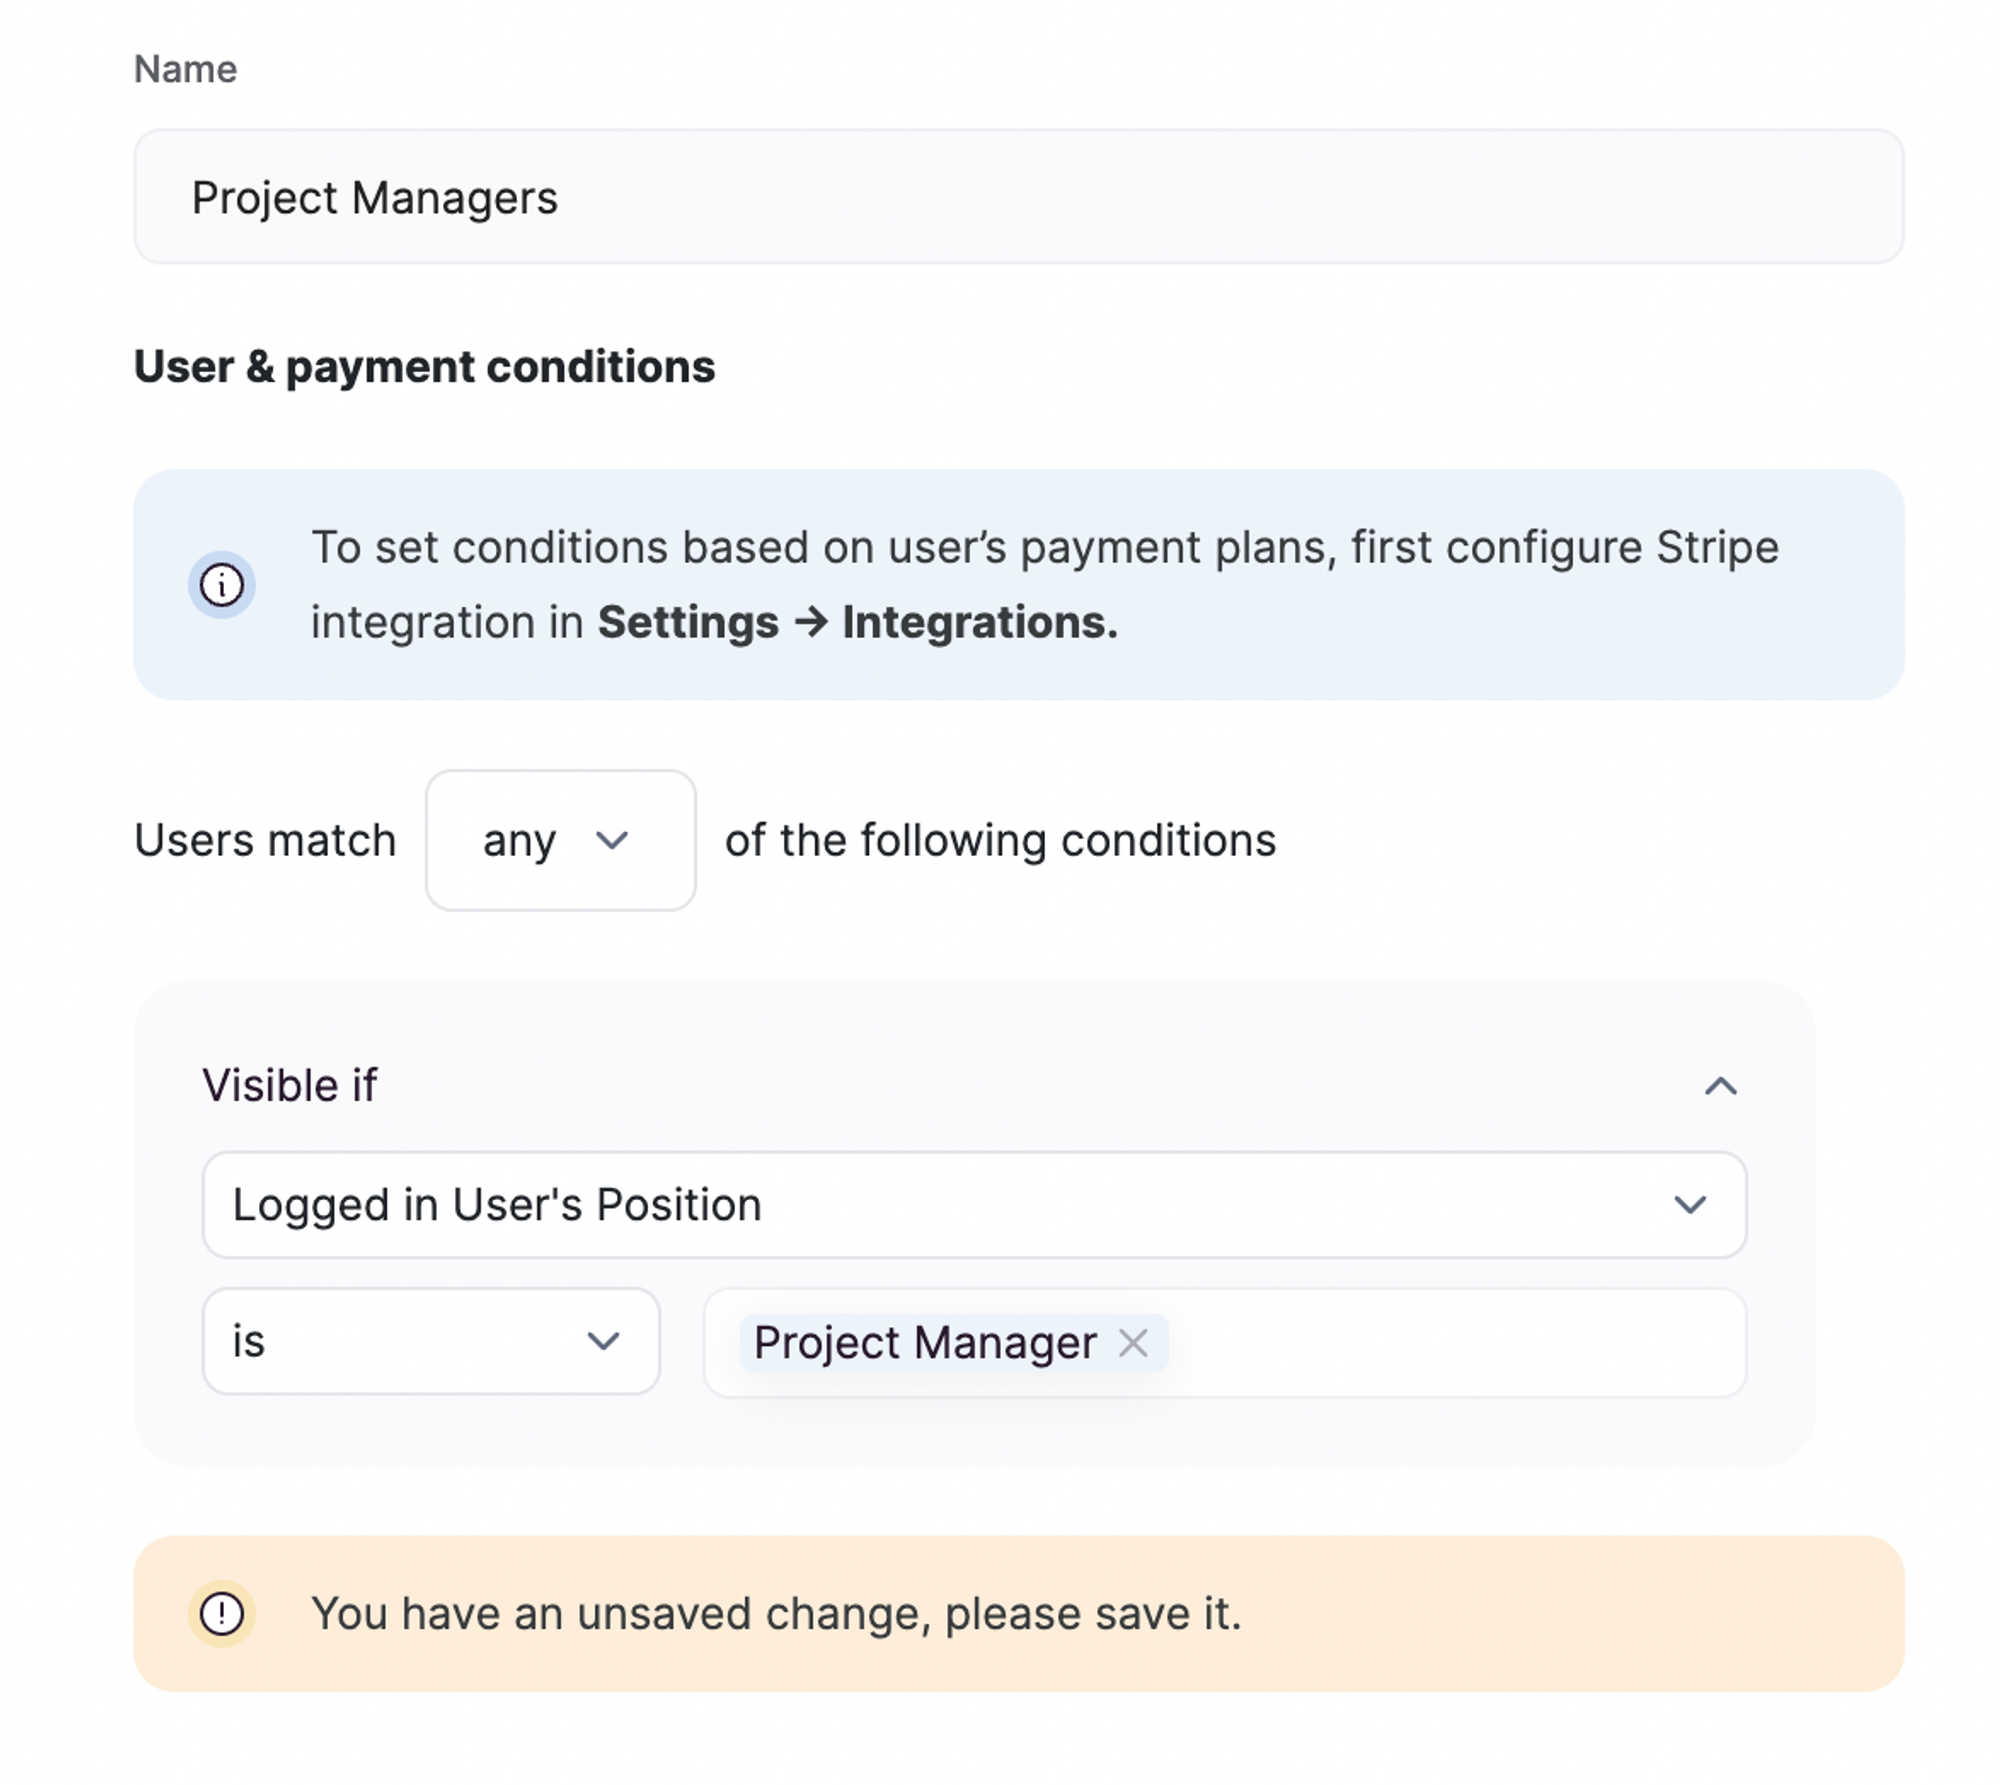 Creating a user group for project managers